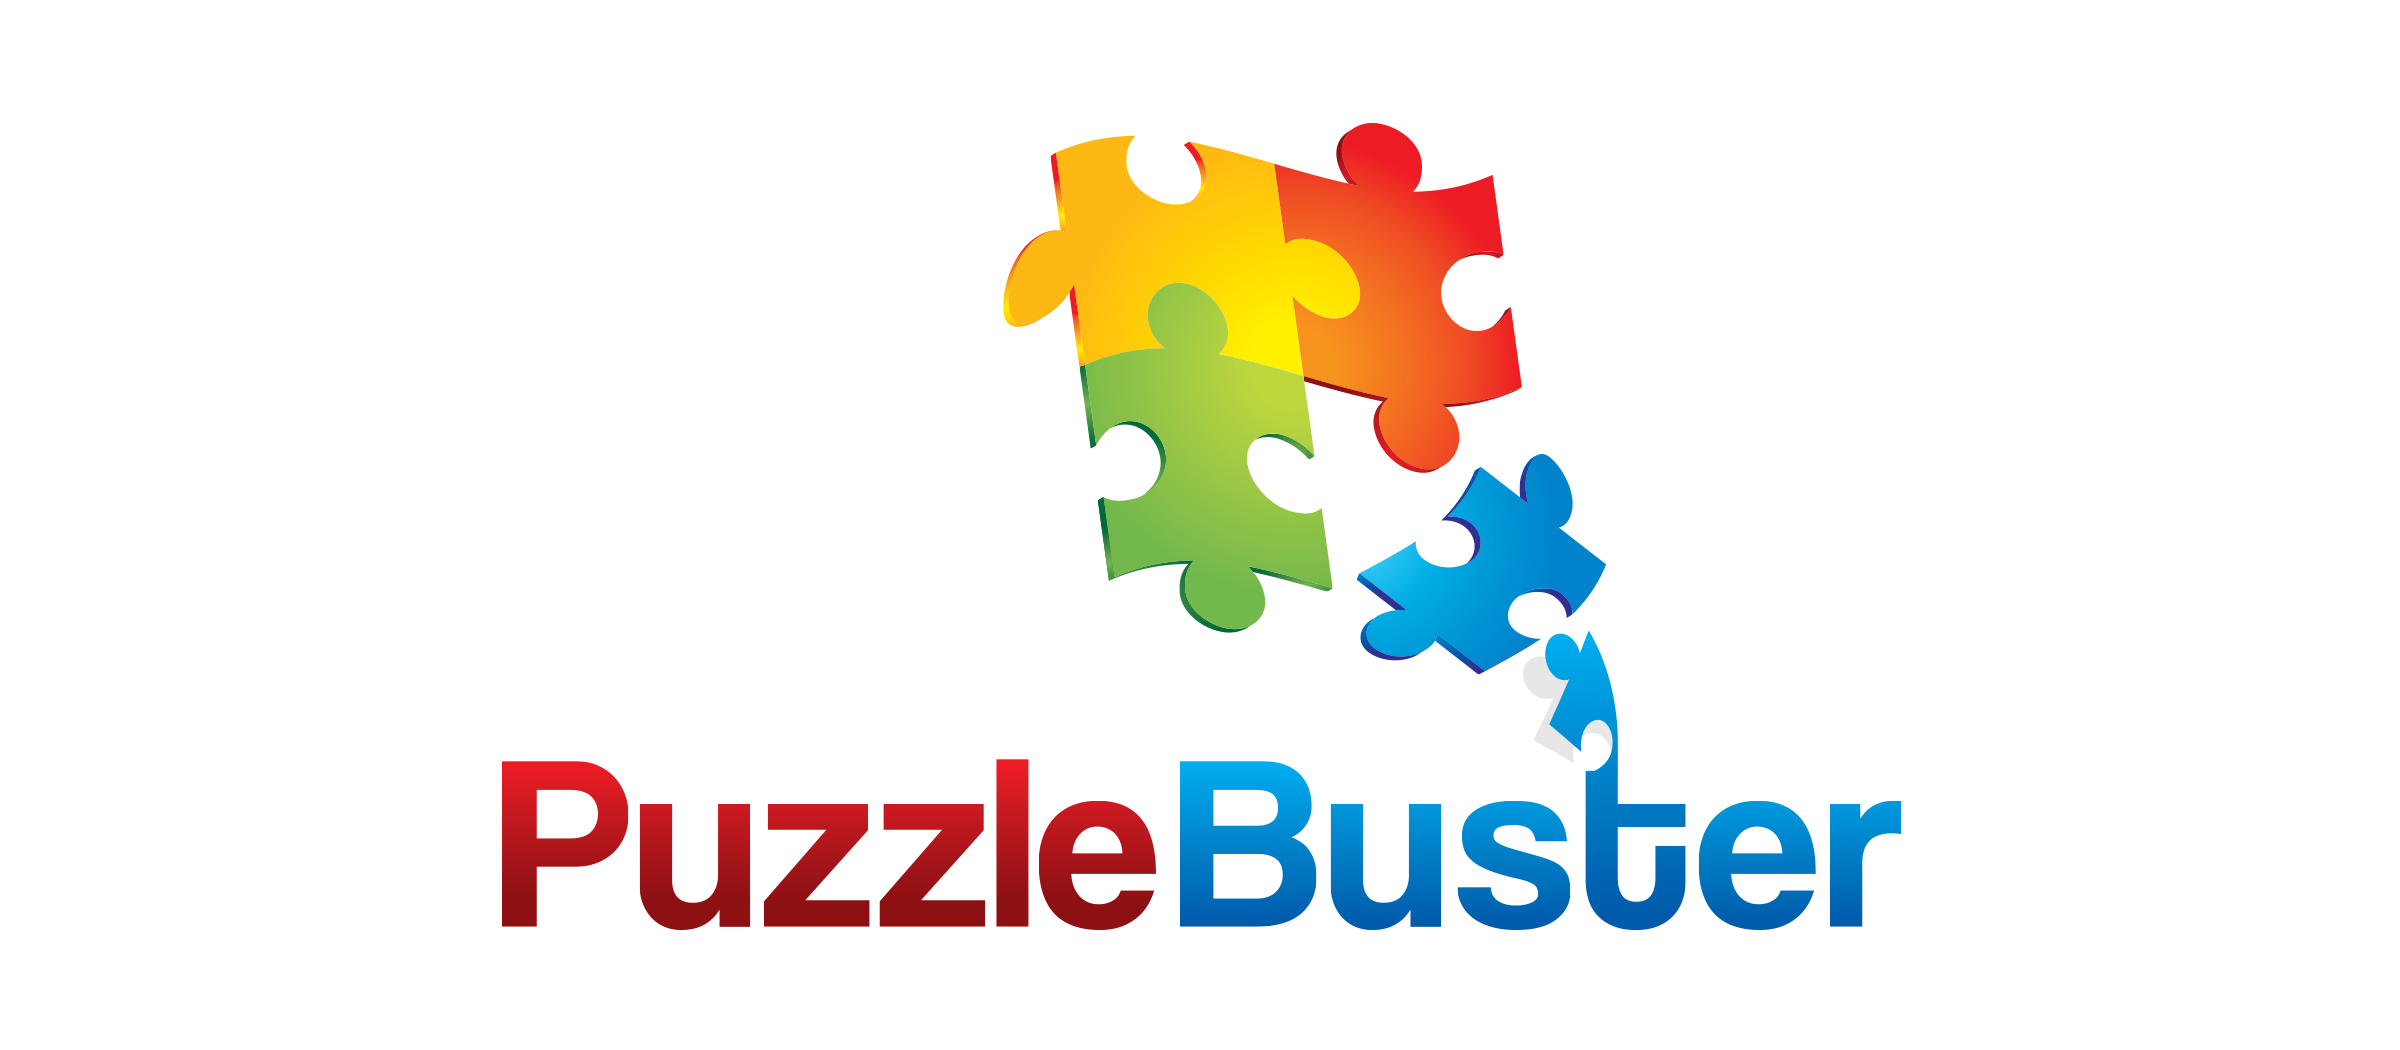 The Puzzle Buster stores and saves your work, when a break is needed.